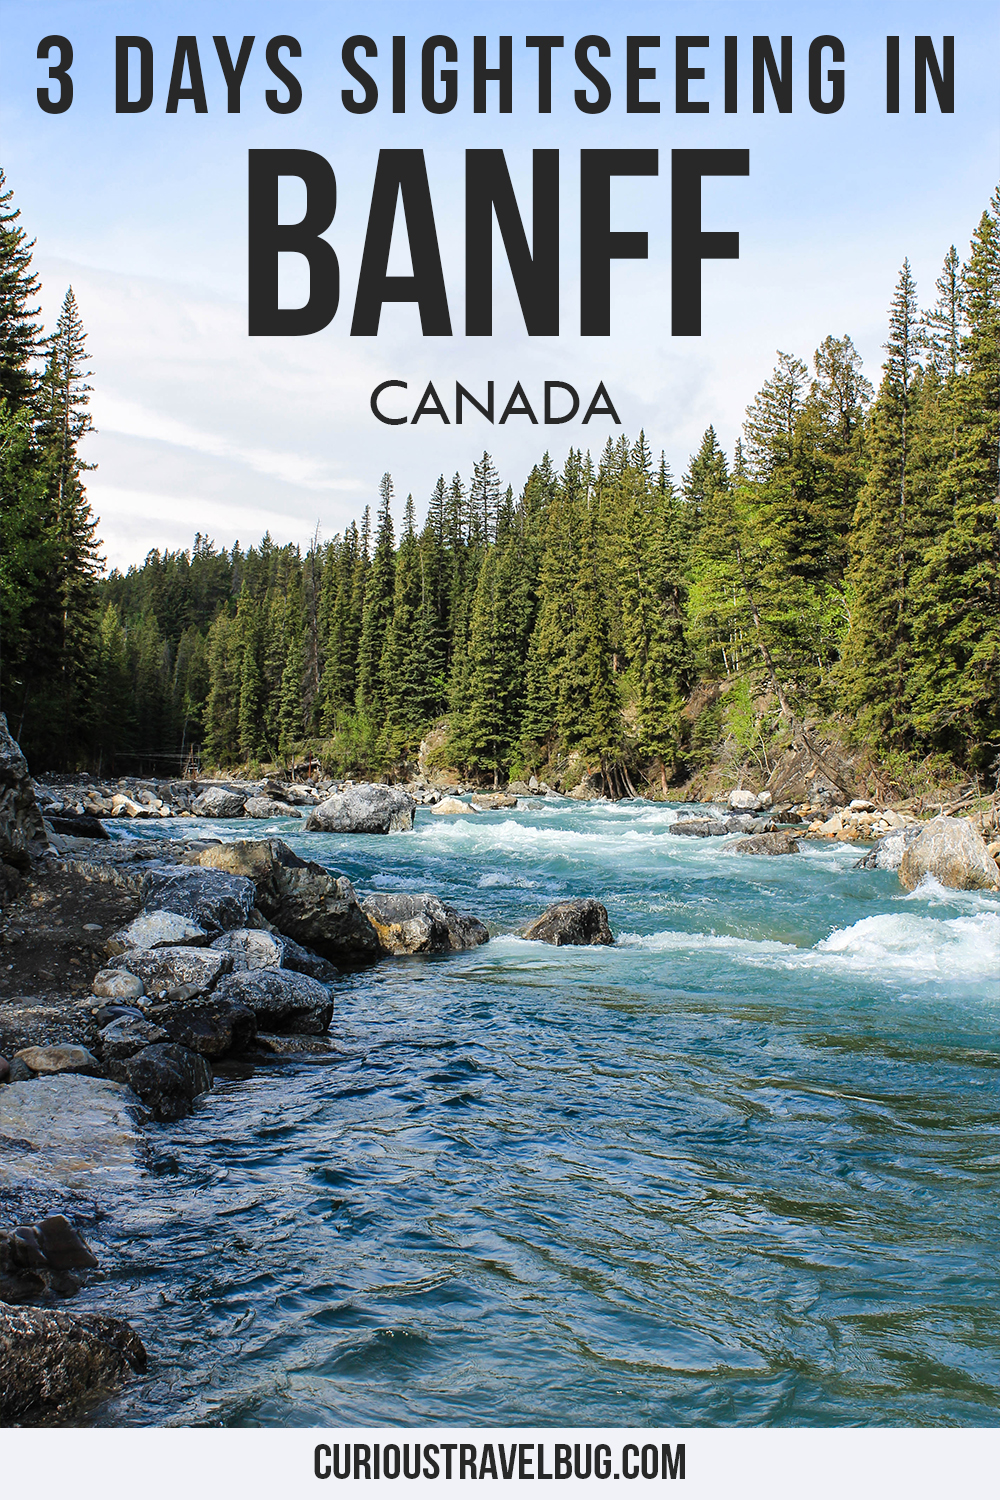 Spend 3 days in Banff National Park exploring all the top sights including Lake Louise, Moraine Lake, hiking Johnston Canyon, taking scenic drives, and exploring top viewpoints. This guide has everything you need to plan your trip to Banff including where to stay and what to eat.